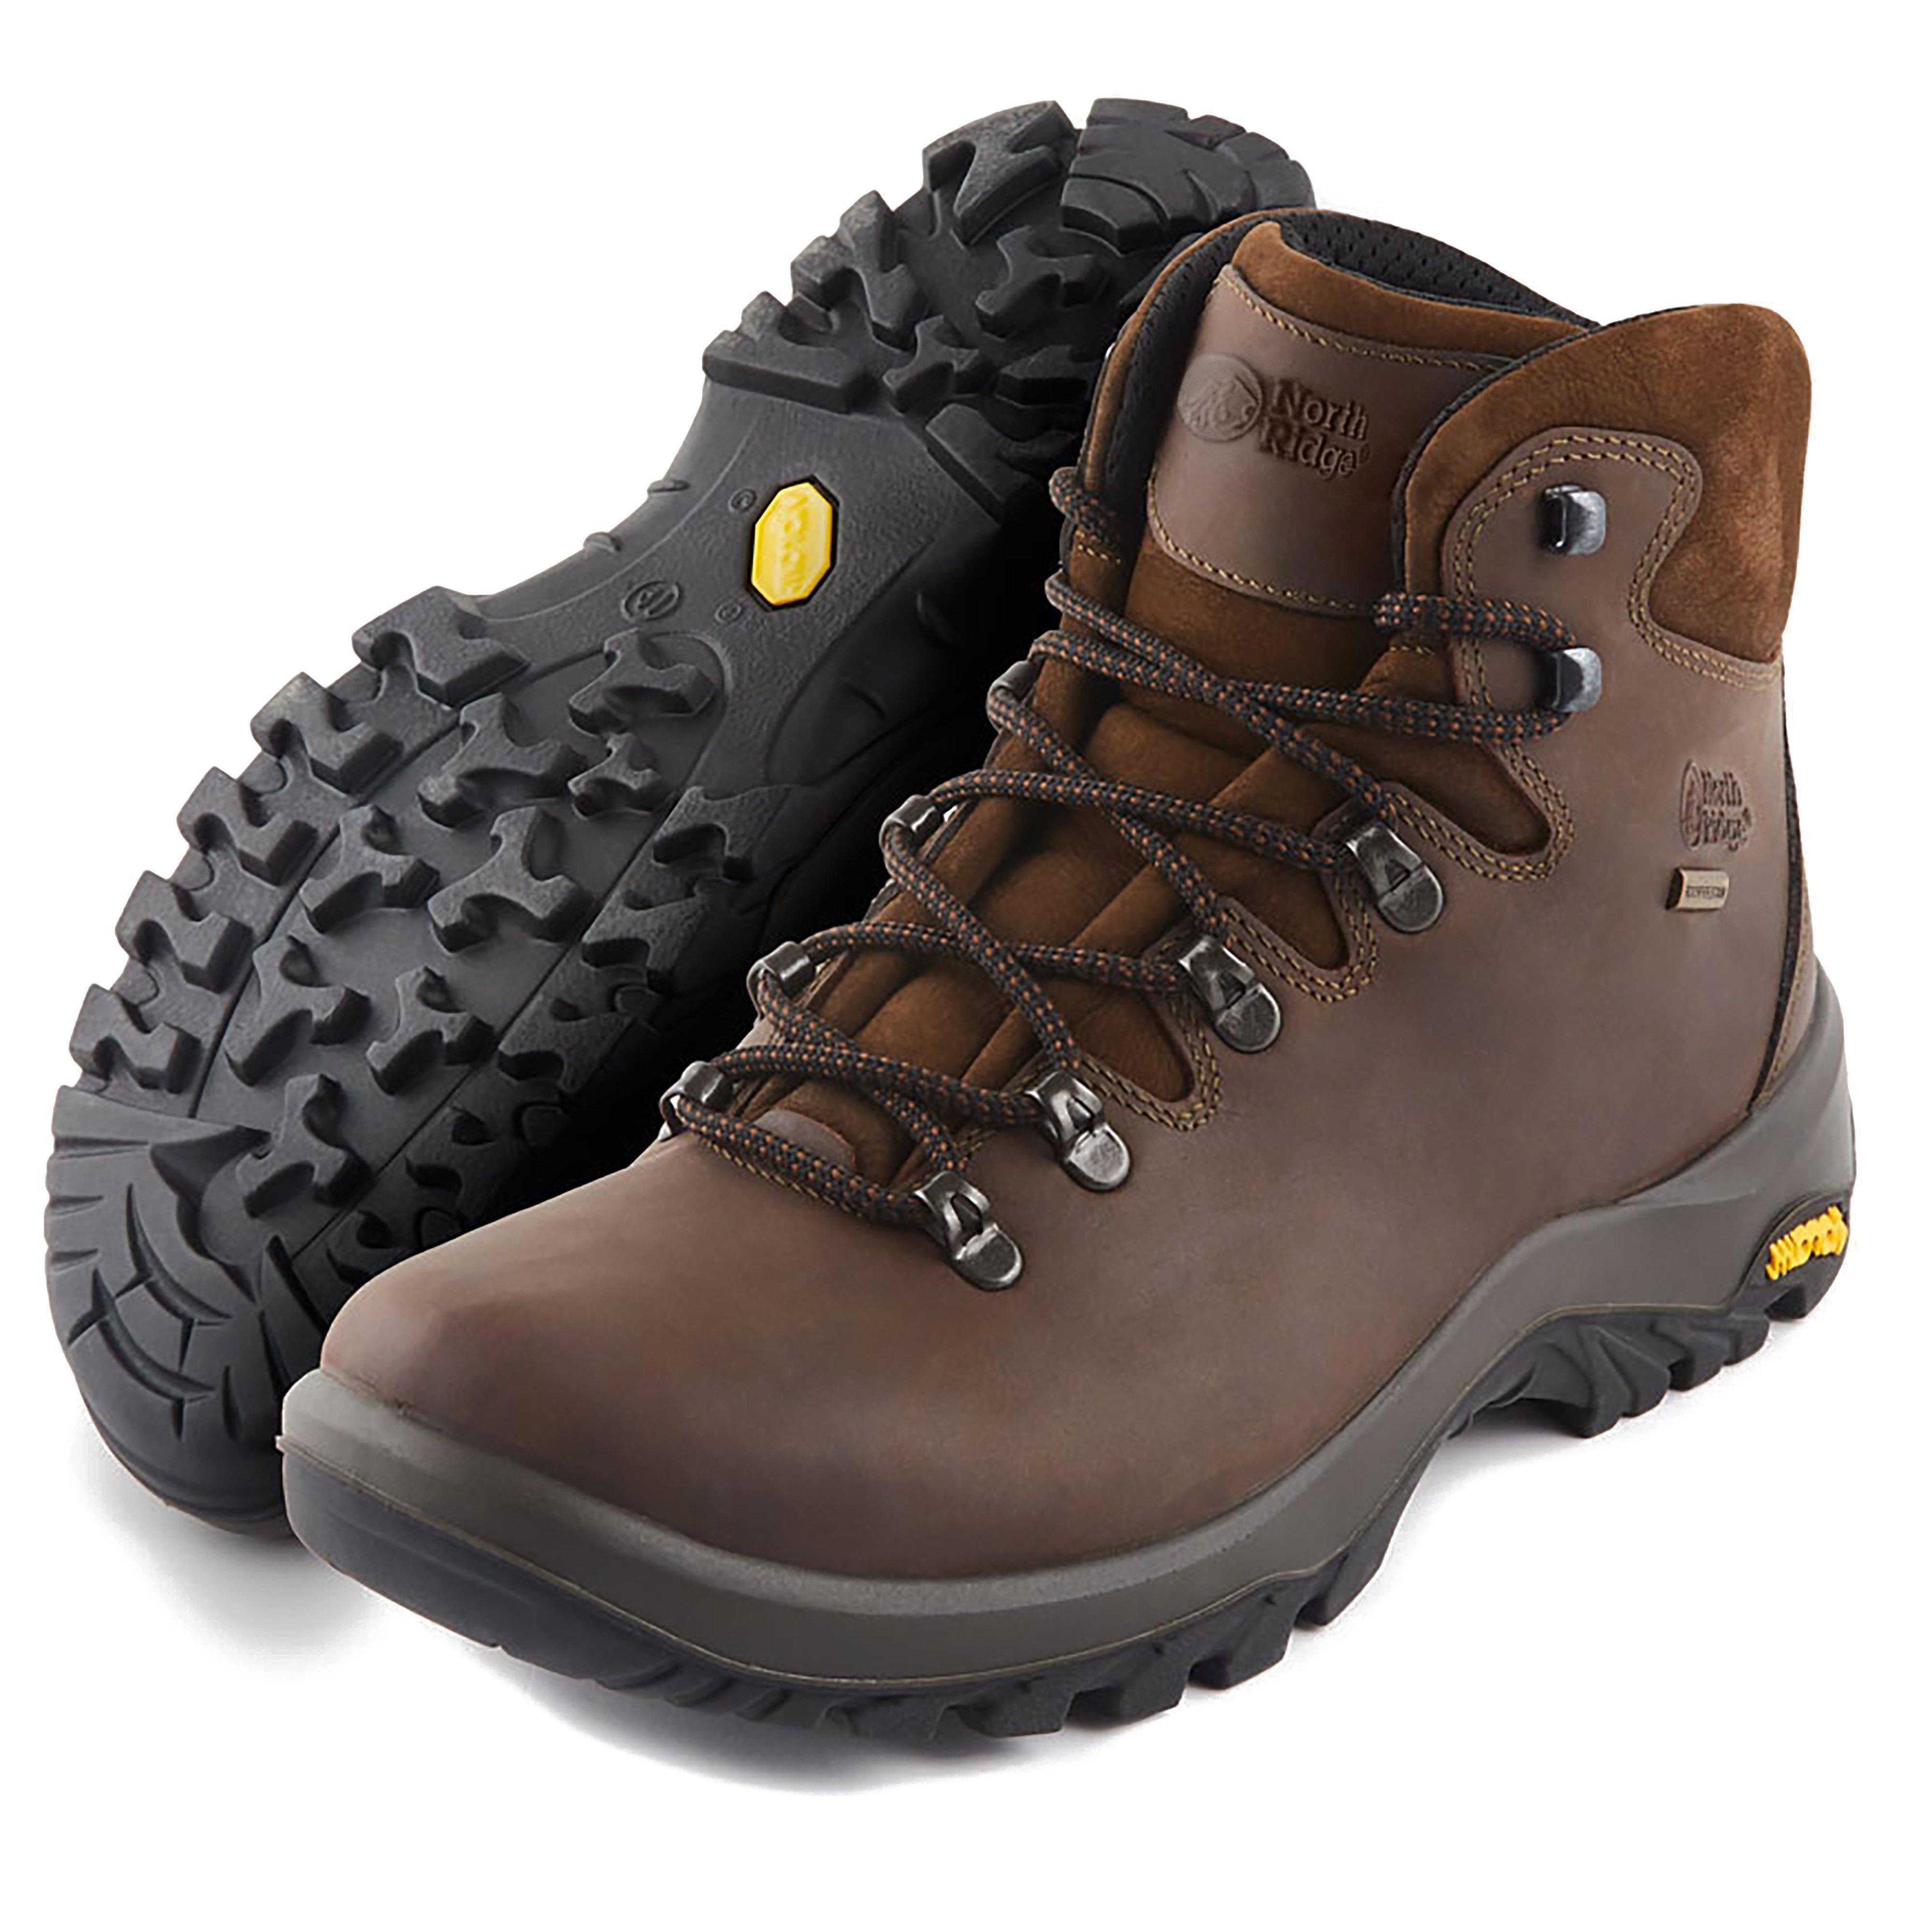 North Ridge Traverse Comfortable Leather Mid Walking Boots Outdoor Footwear